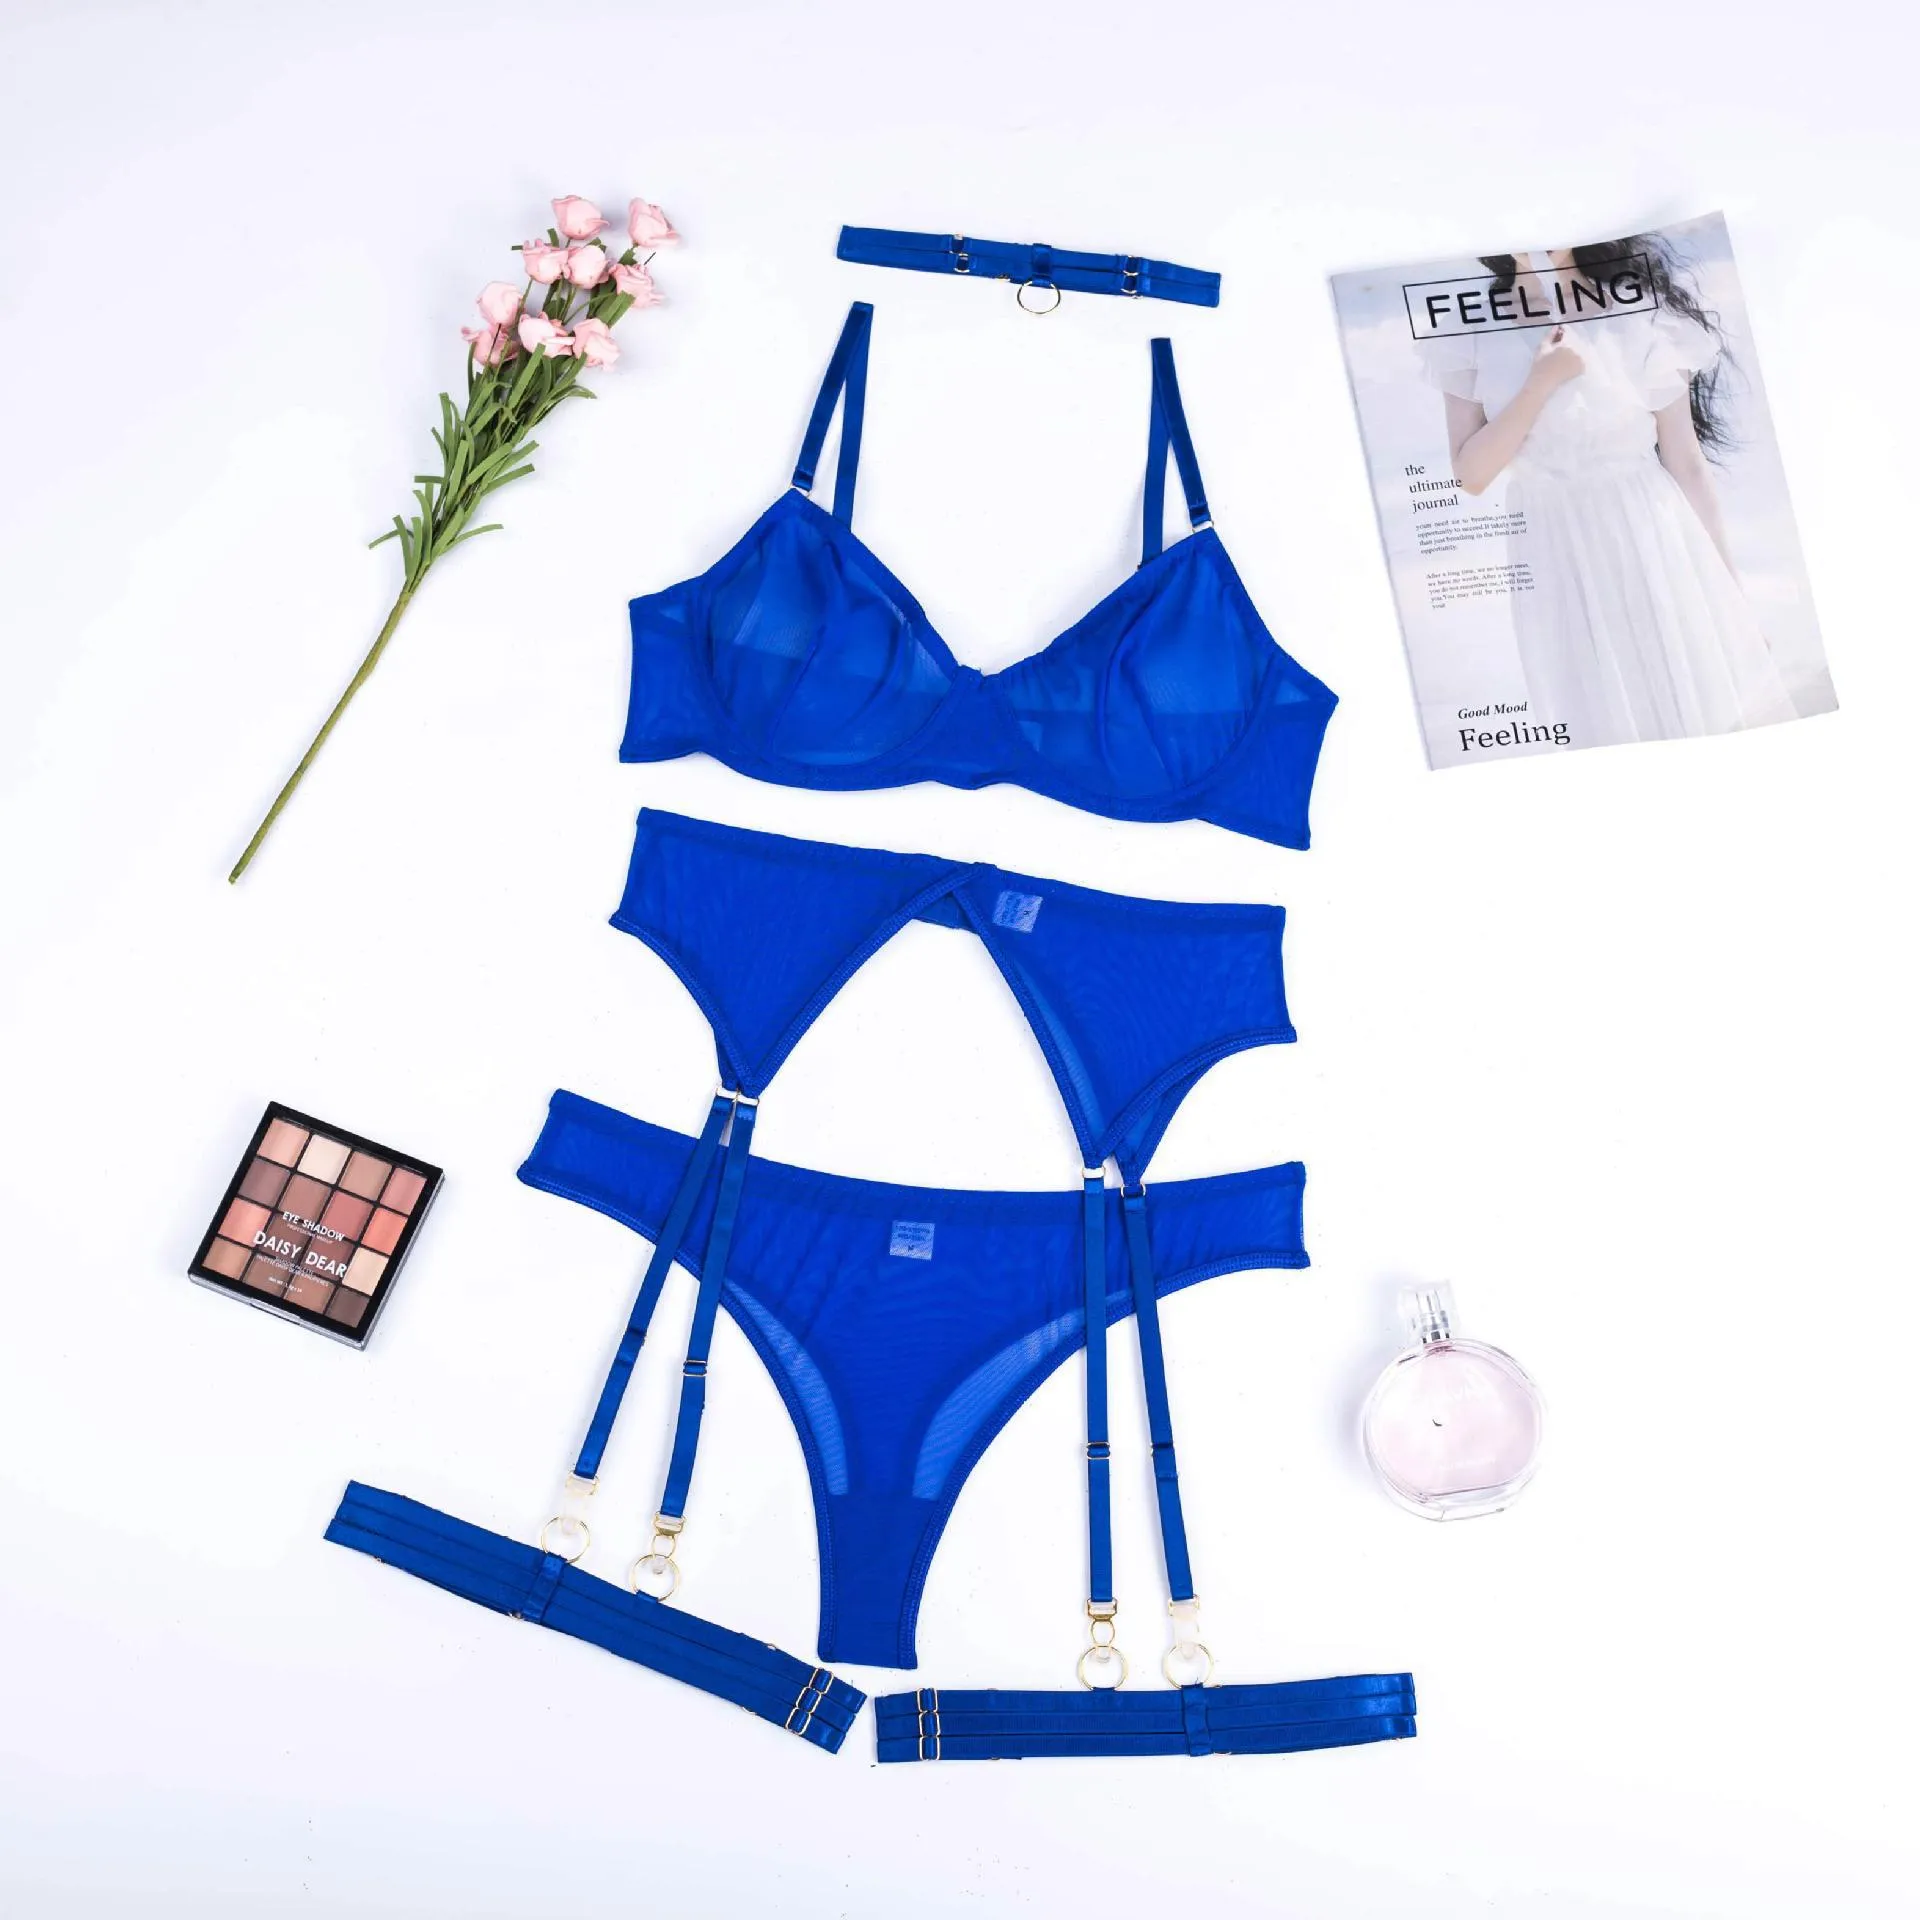 Sexy Lingerie Set For Women  Bra Set, Garters, And Briefs With  Transparent Lace And Seamless Blue Setup From Jacky0817, $12.82